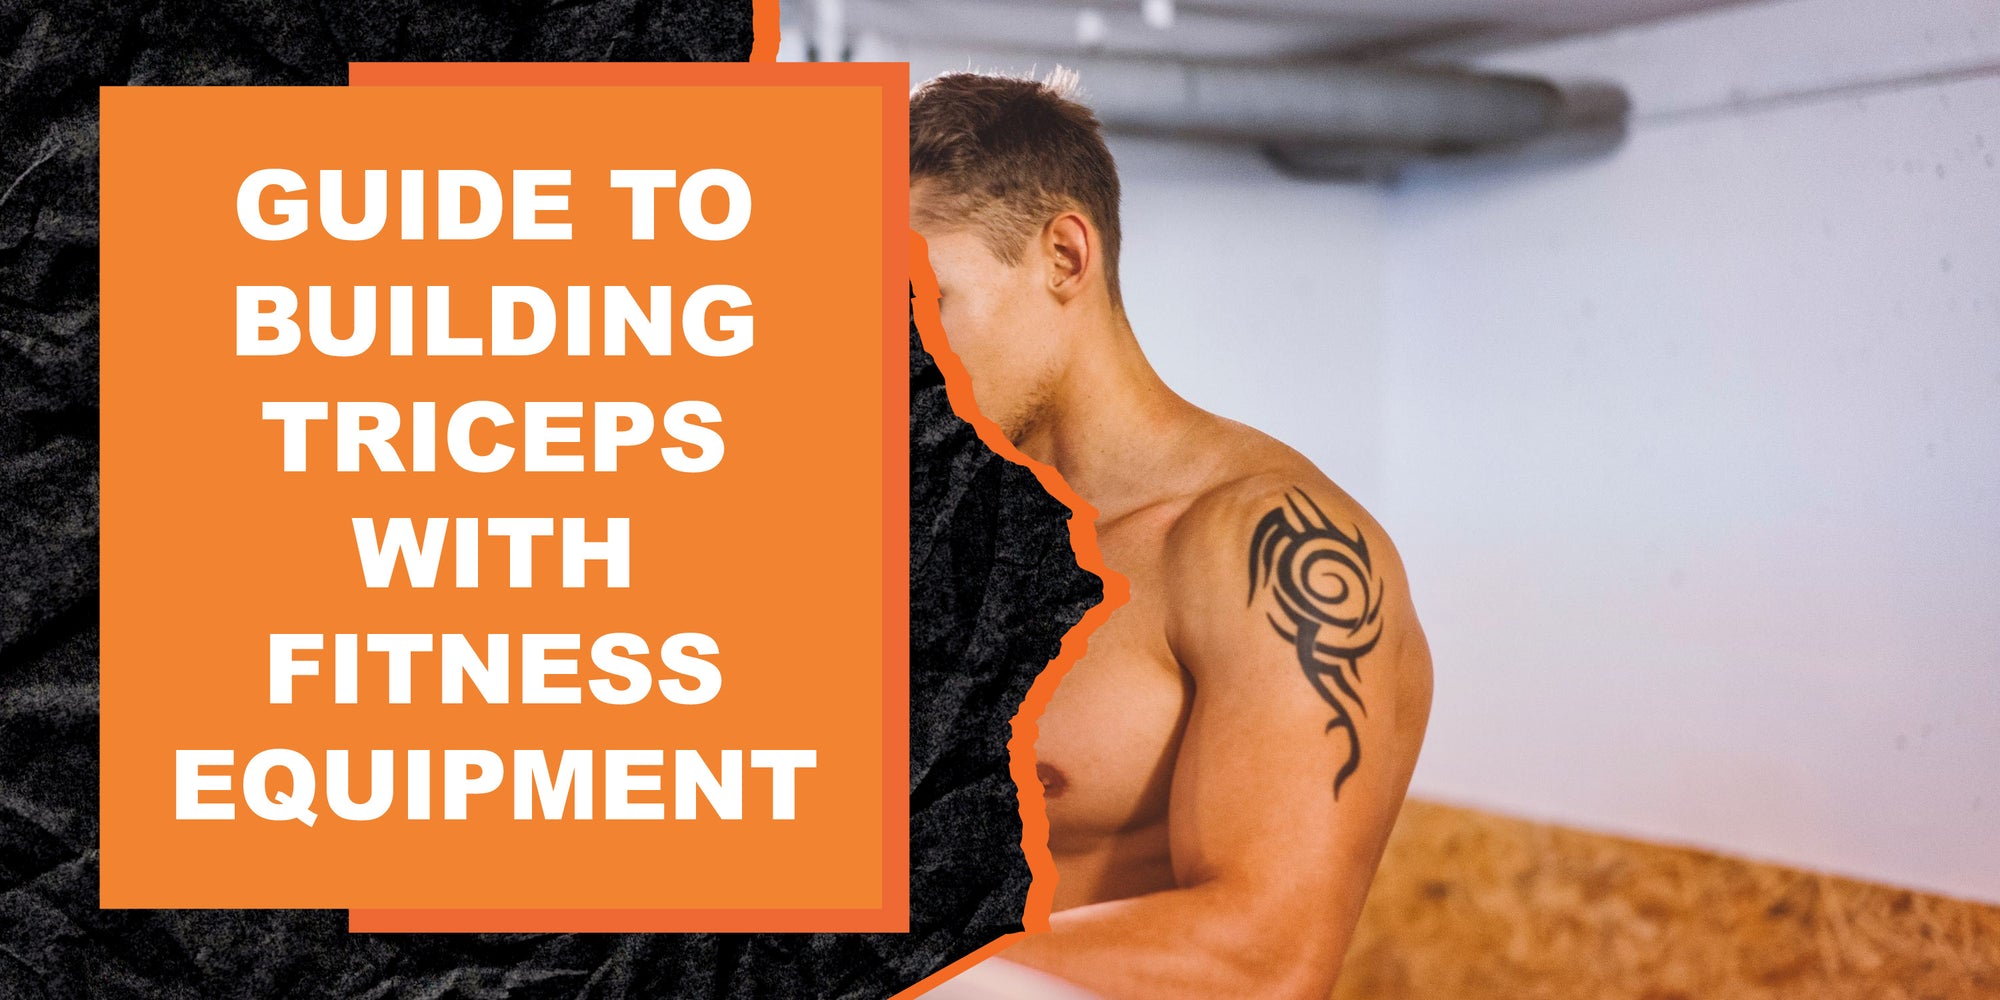 The Complete Guide to Building Triceps with Fitness Equipment